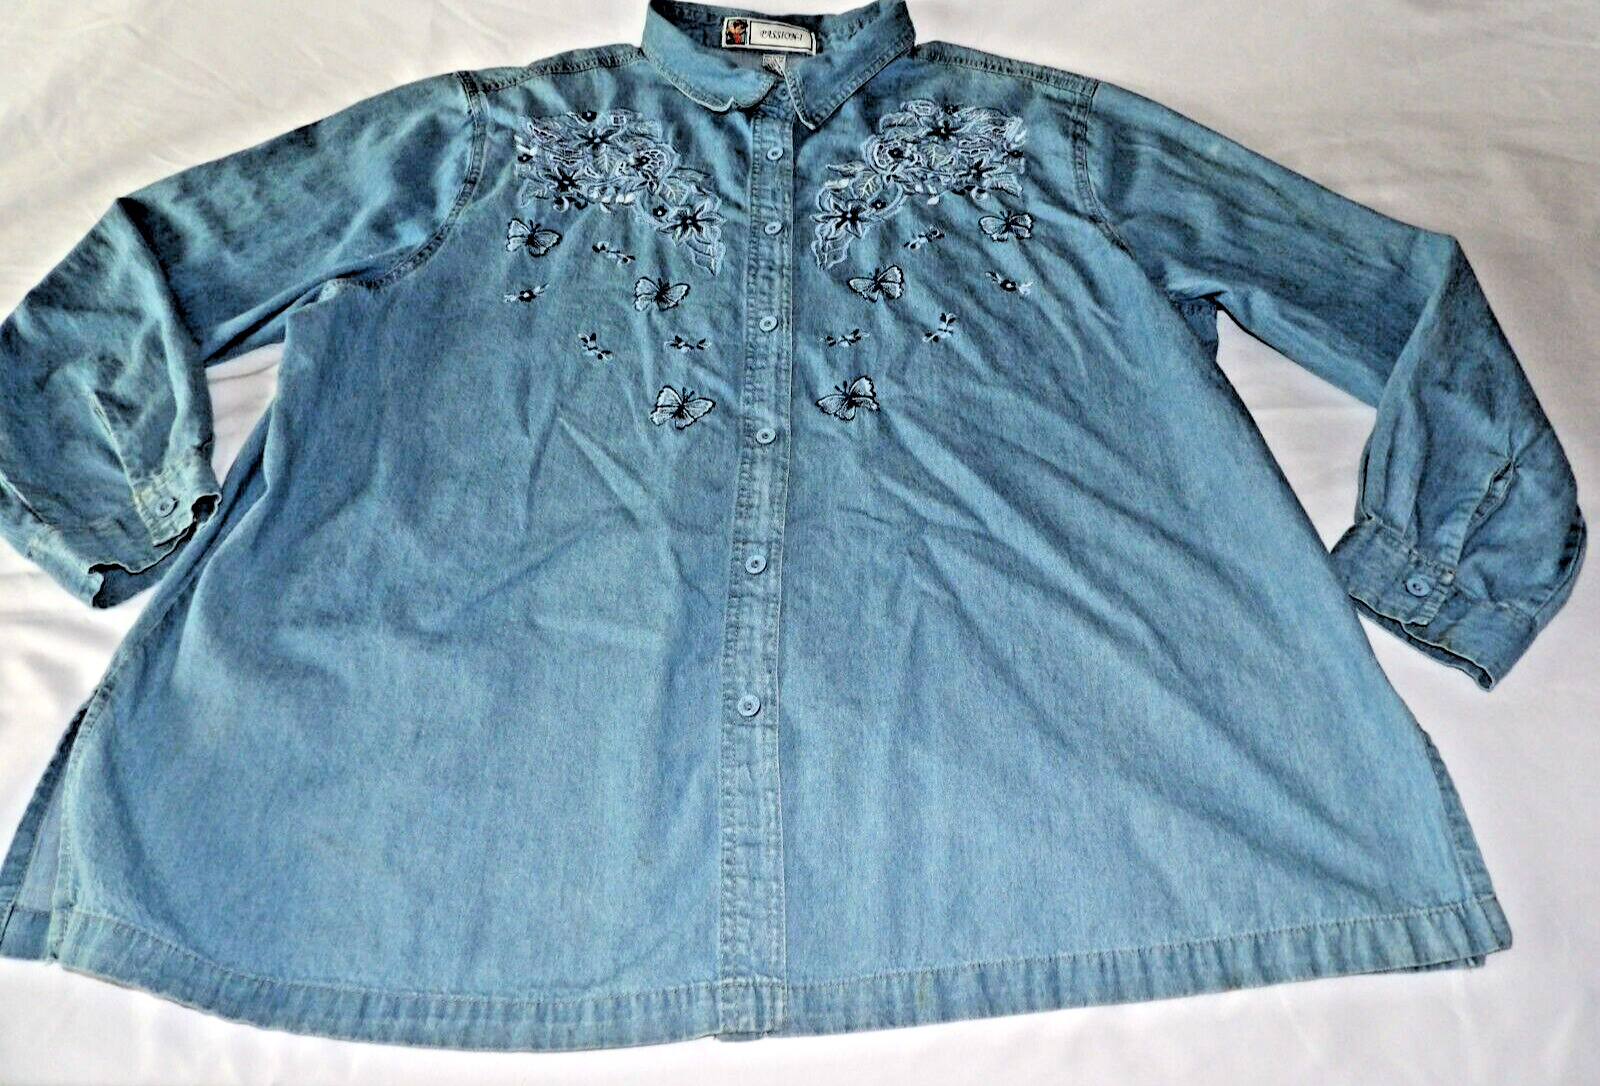 Passion-I Denim Shirt 2X Button Long Sleeve 90s Vintage Embroidered Floral Blue